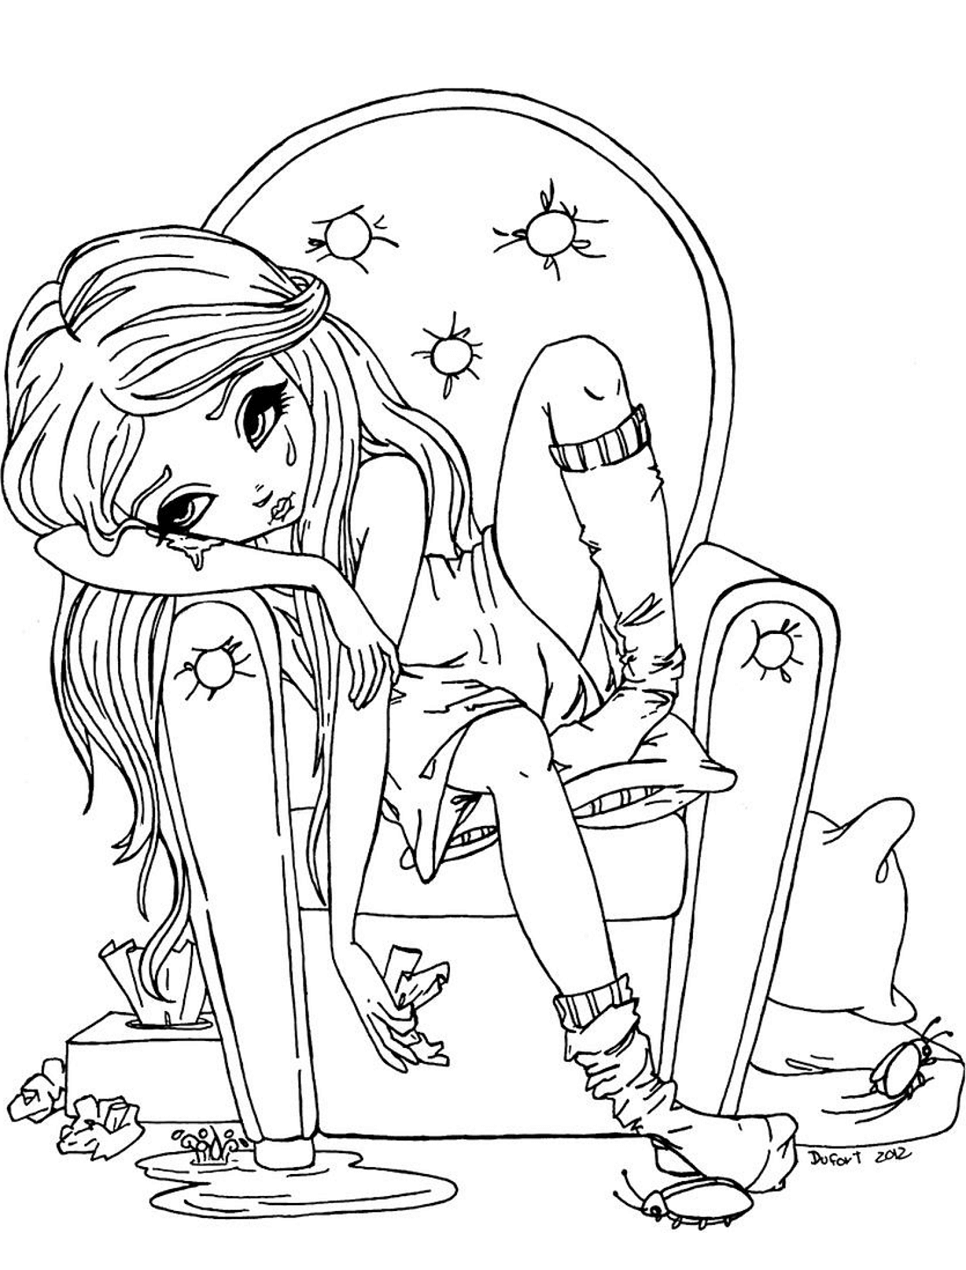 Sad Cafards Coloring Page   Free Printable Coloring Pages for Kids